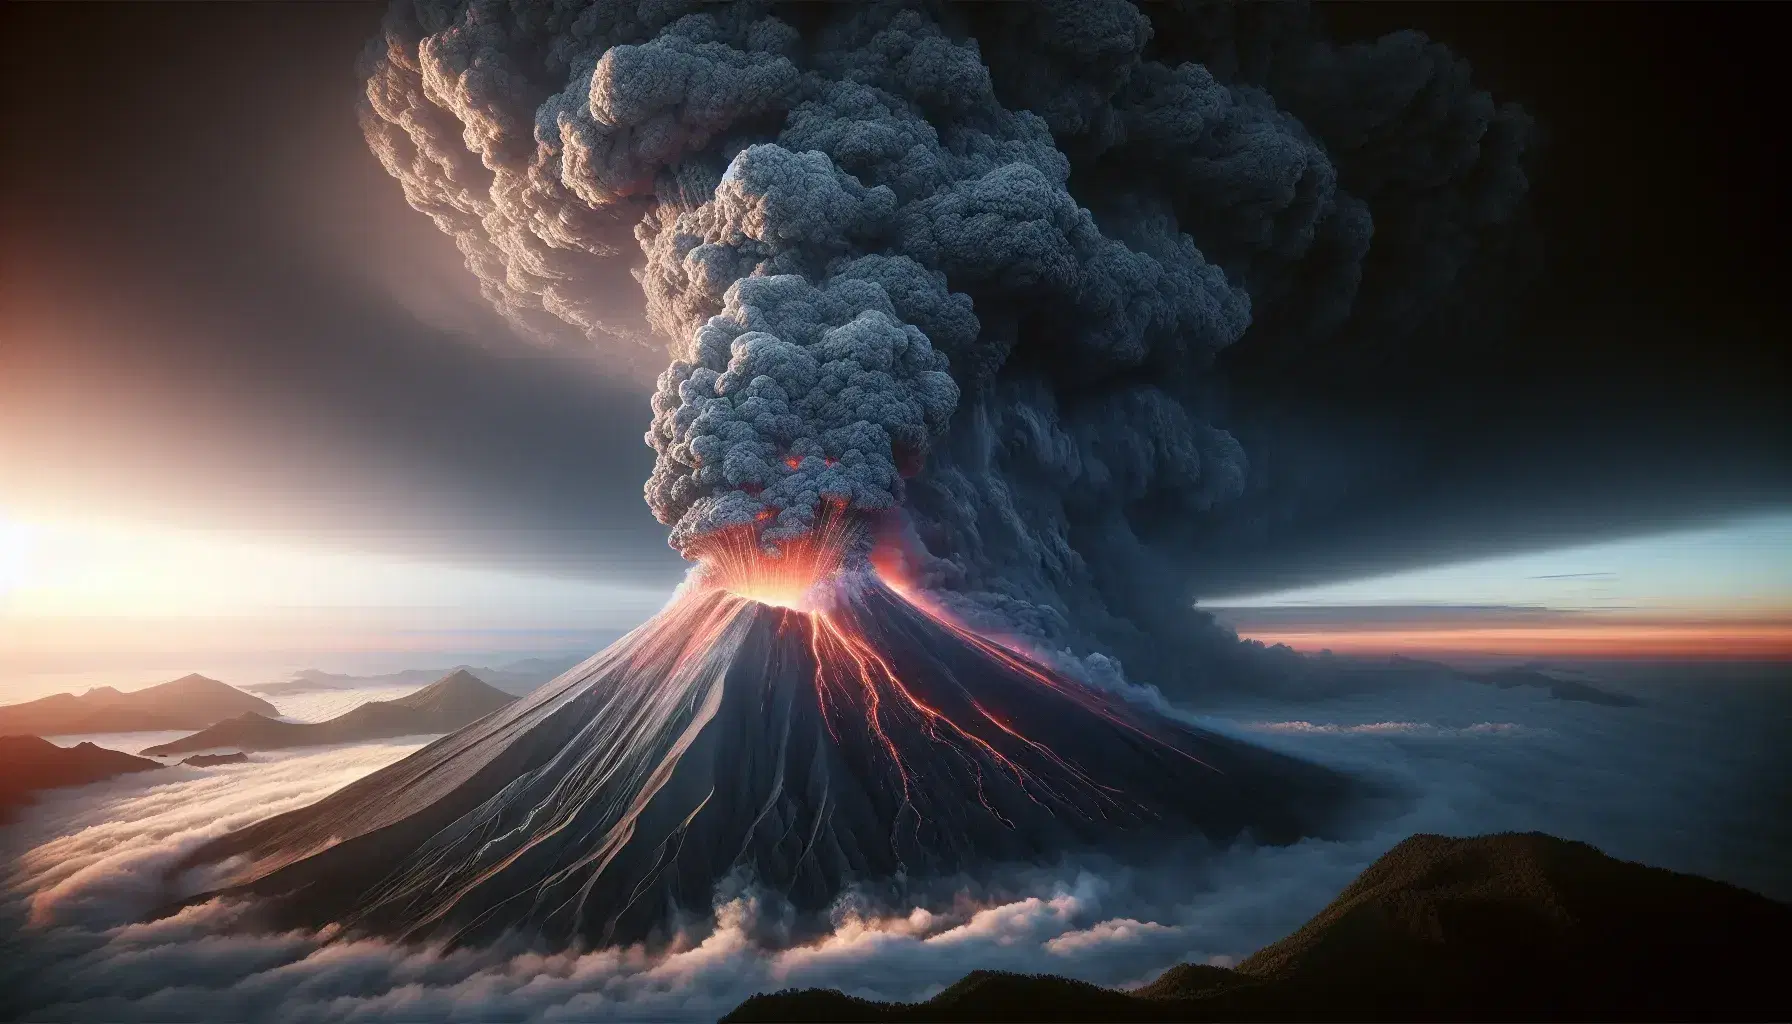 Volcanic eruption with orange lava and gray ash cloud rising into the blue sky, trees in silhouette and pristine landscape.